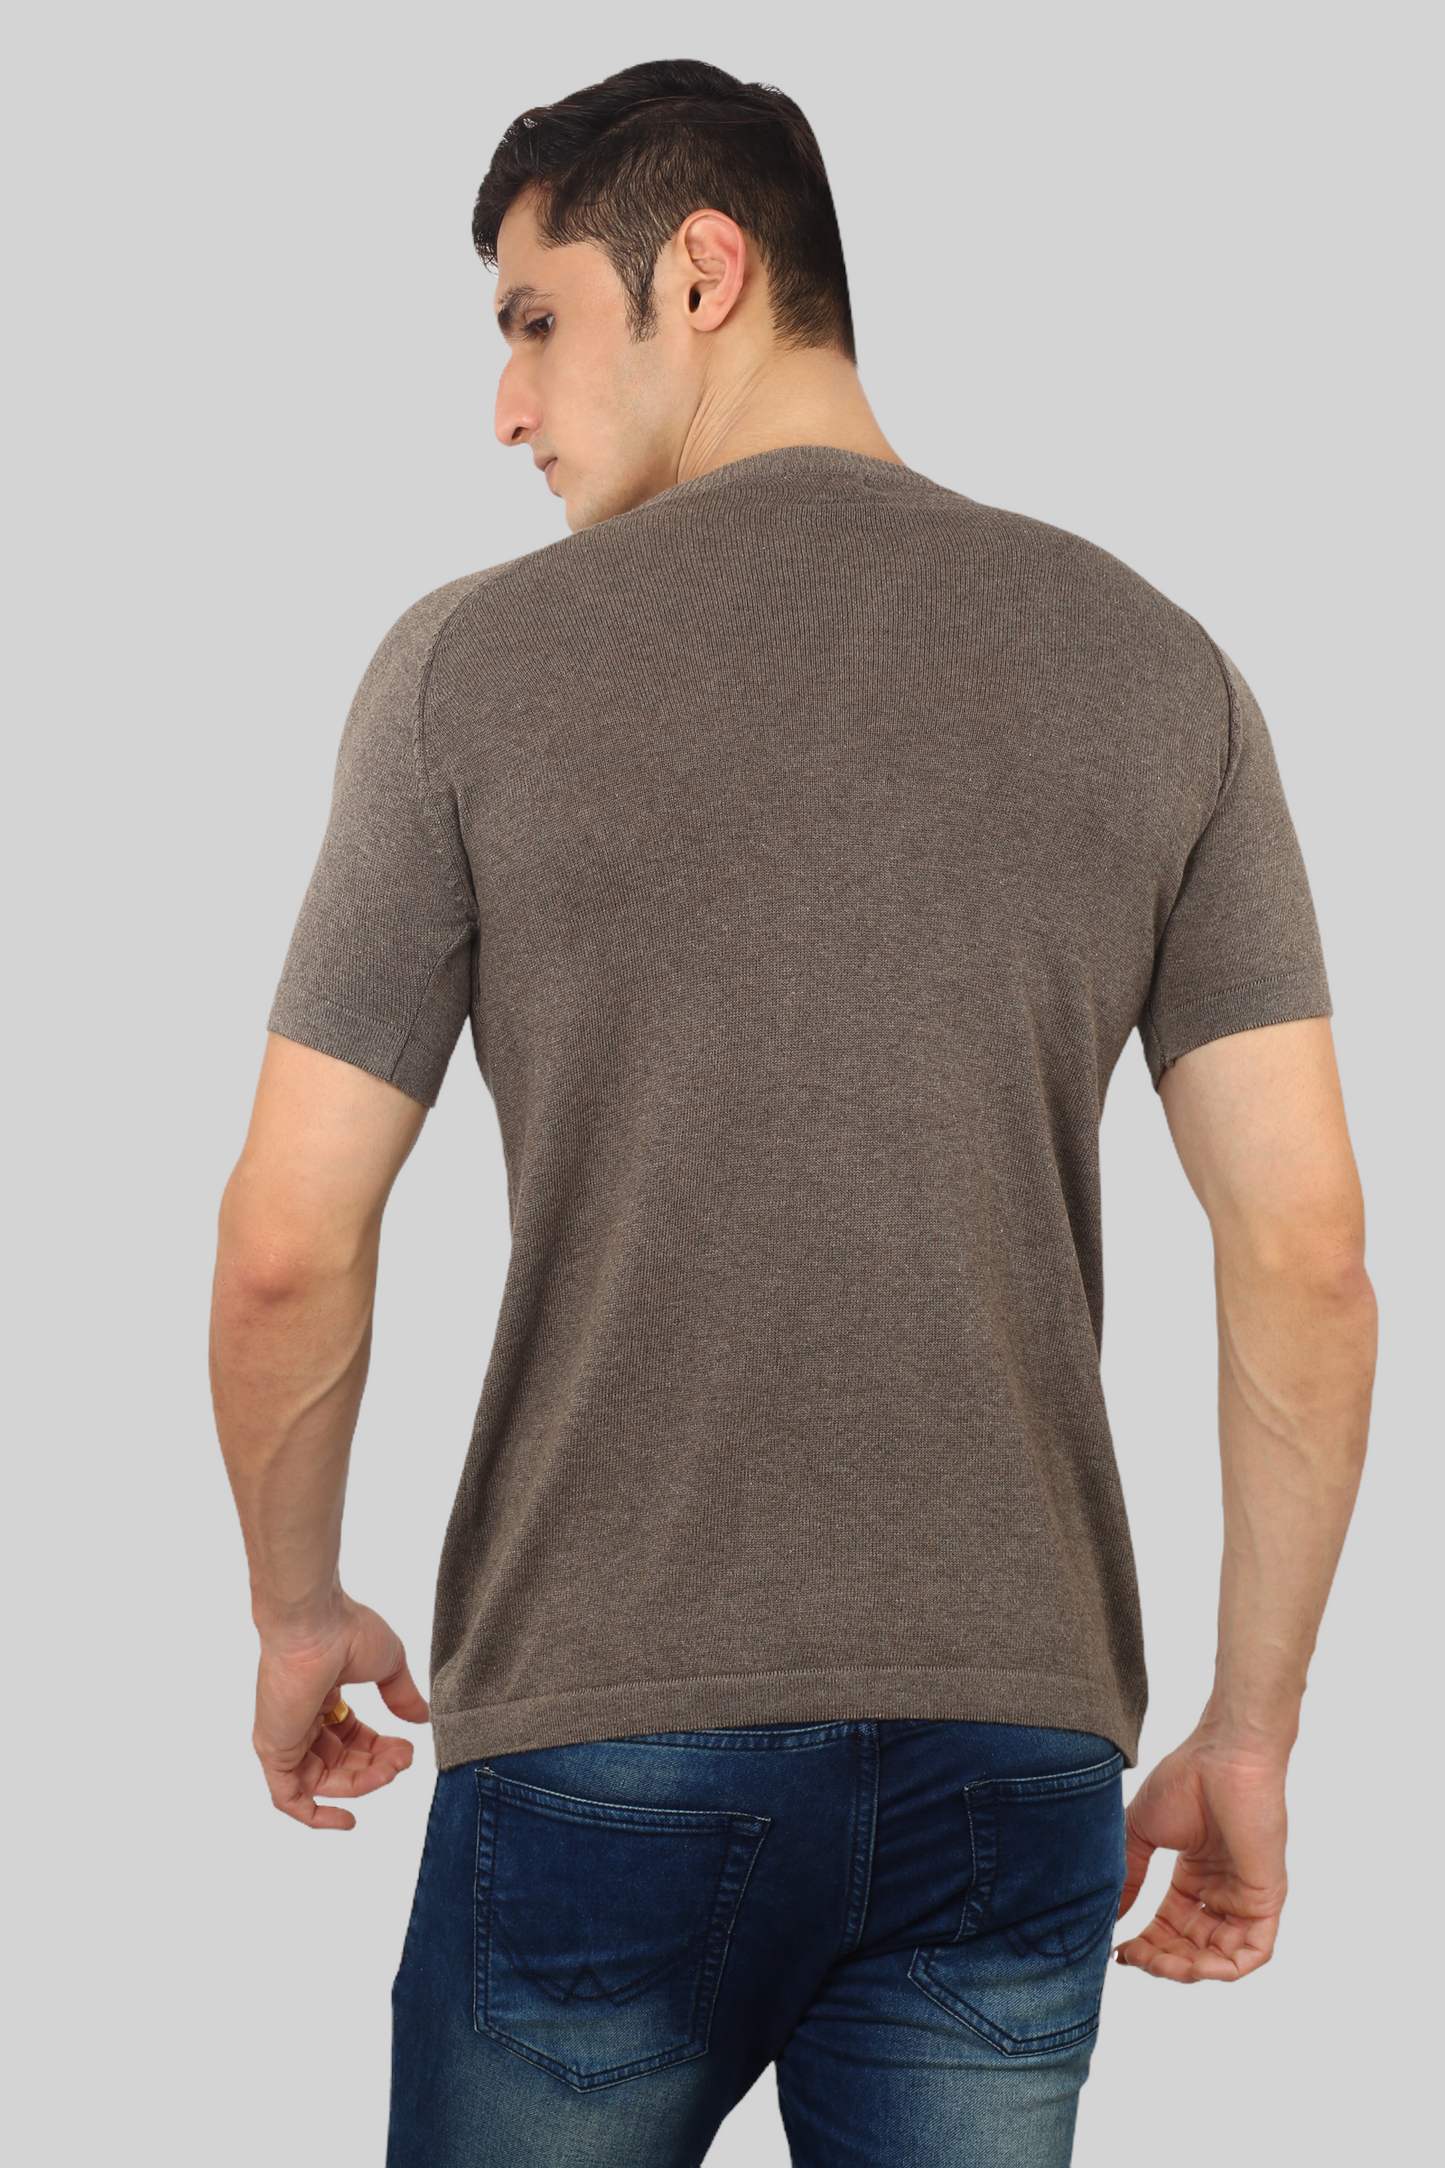 Winchester Grey Half Sleeve Flat Knit Round neck T-Shirt for men